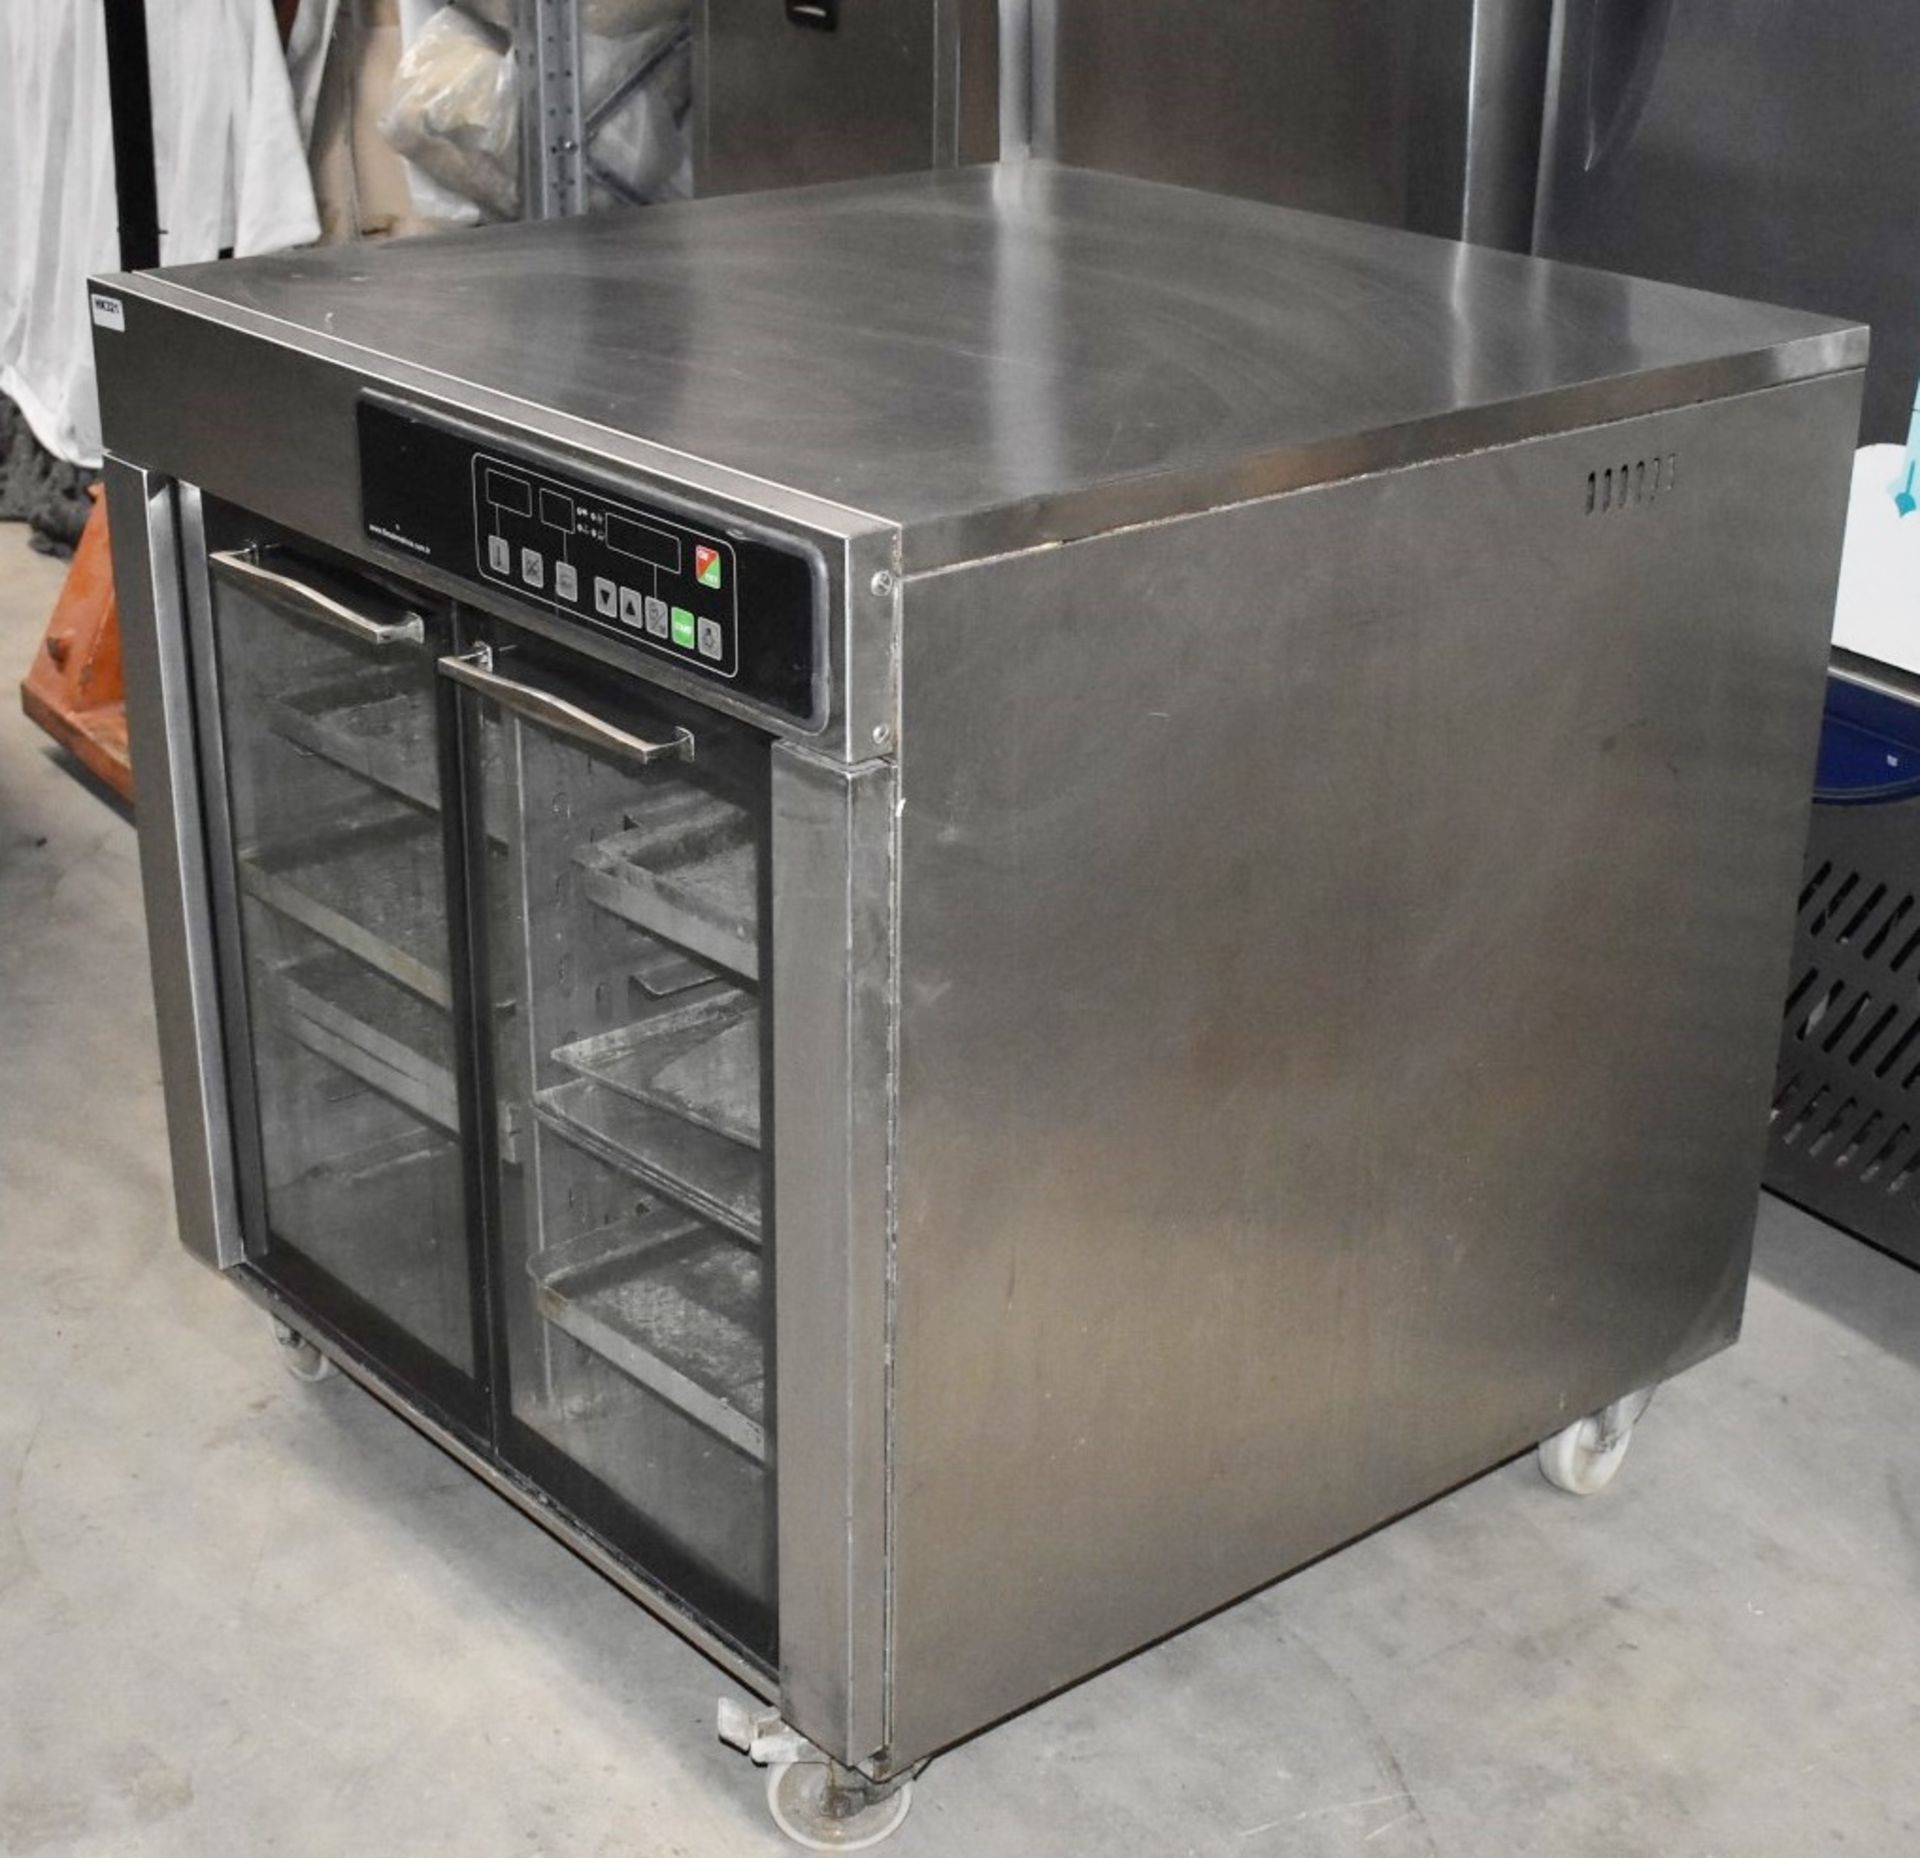 1 x FiMAK Windrose FW10 Convection Baking Oven - 240v - Size: 95 x 95 x 95 cms - Ref : HK321 WH2 B5G - Image 3 of 8